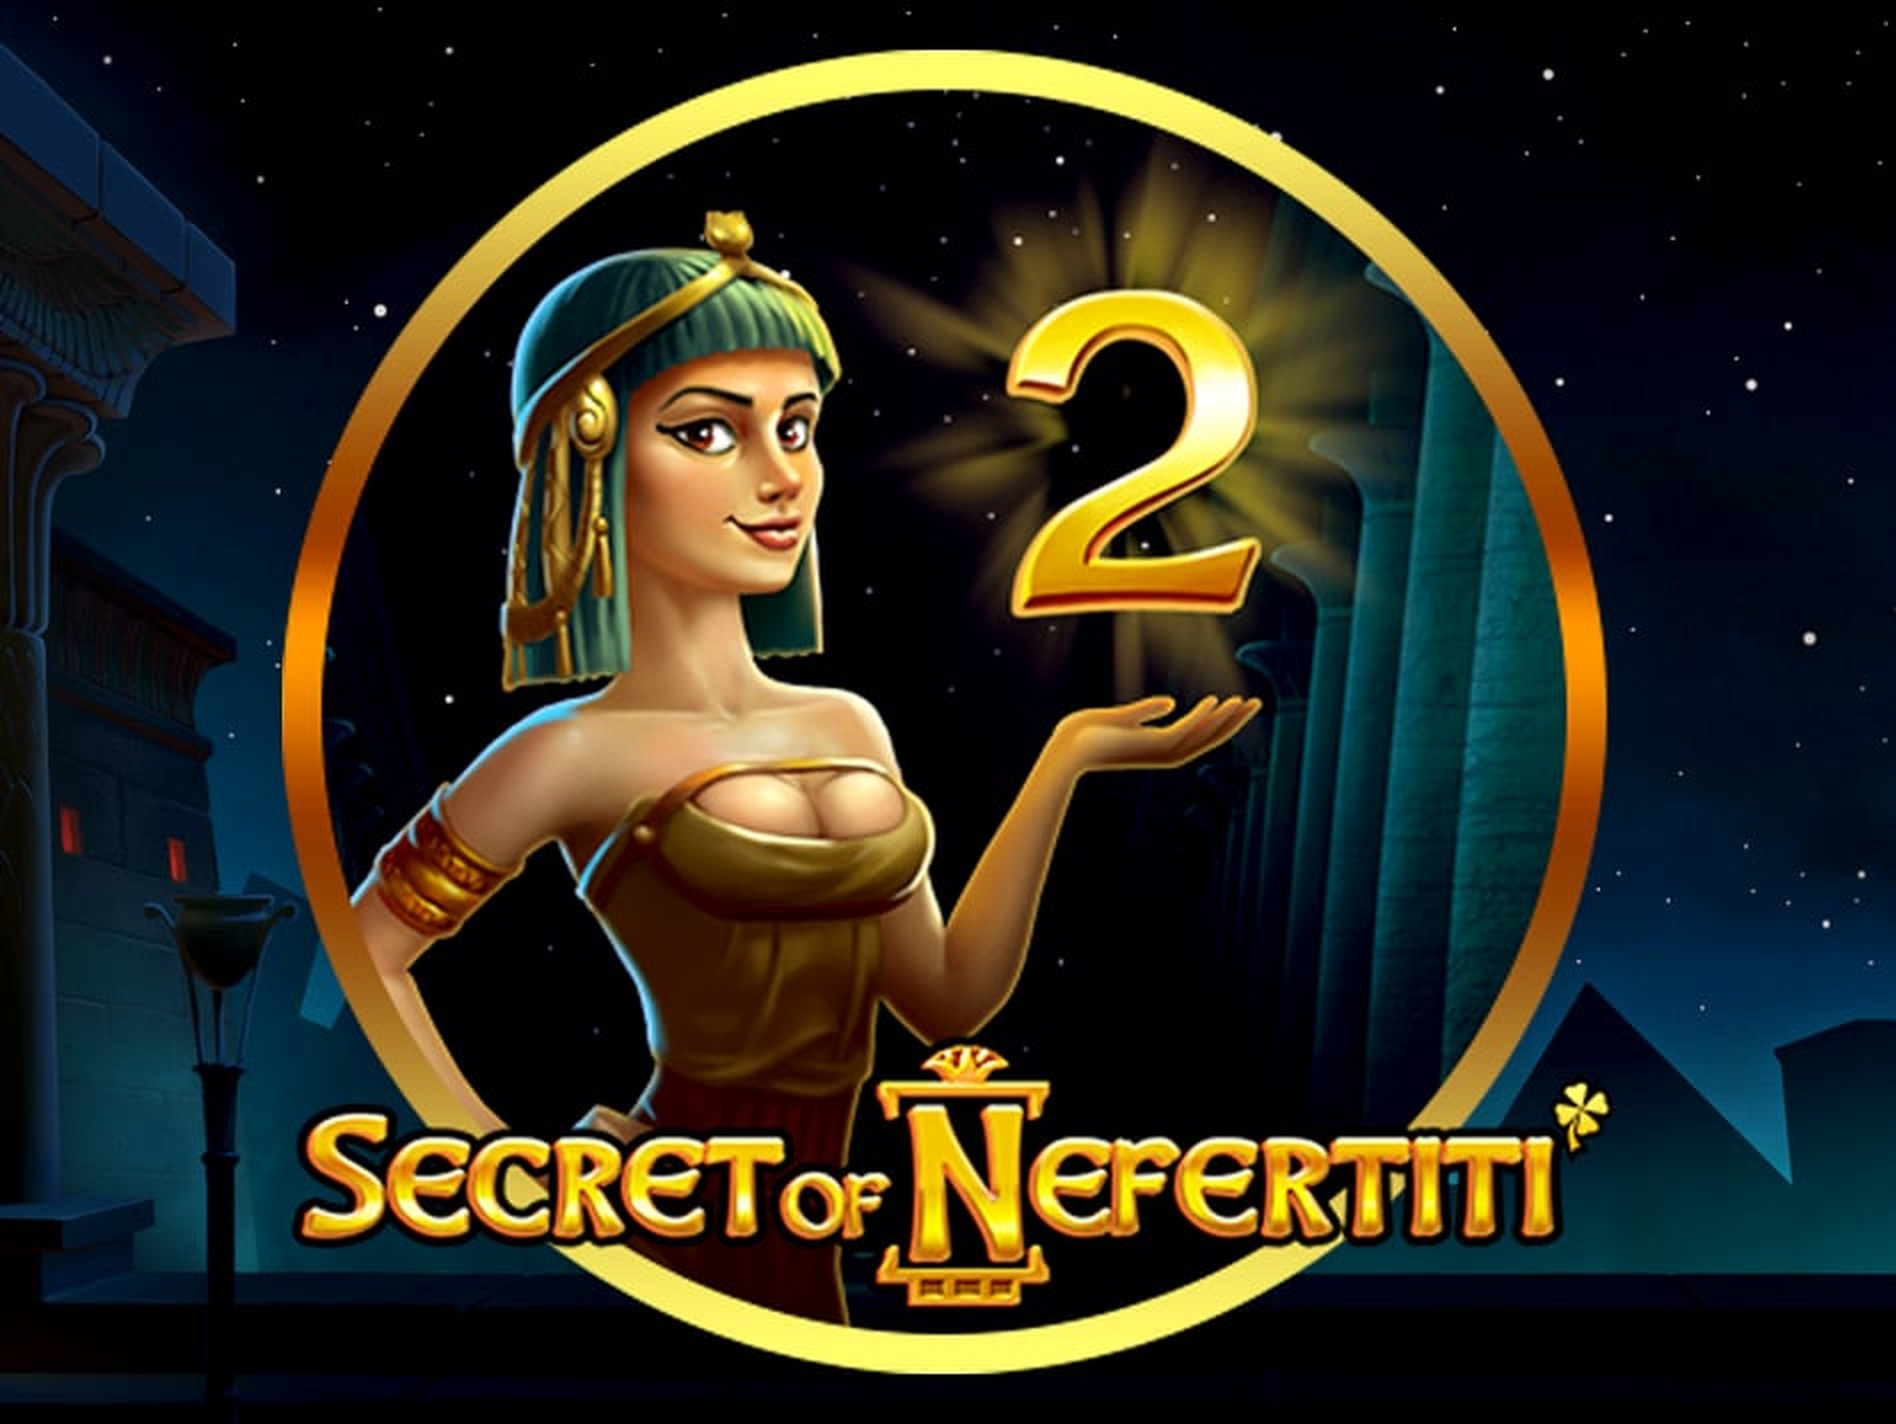 The Secret Of Nefertiti Online Slot Demo Game by Booongo Gaming